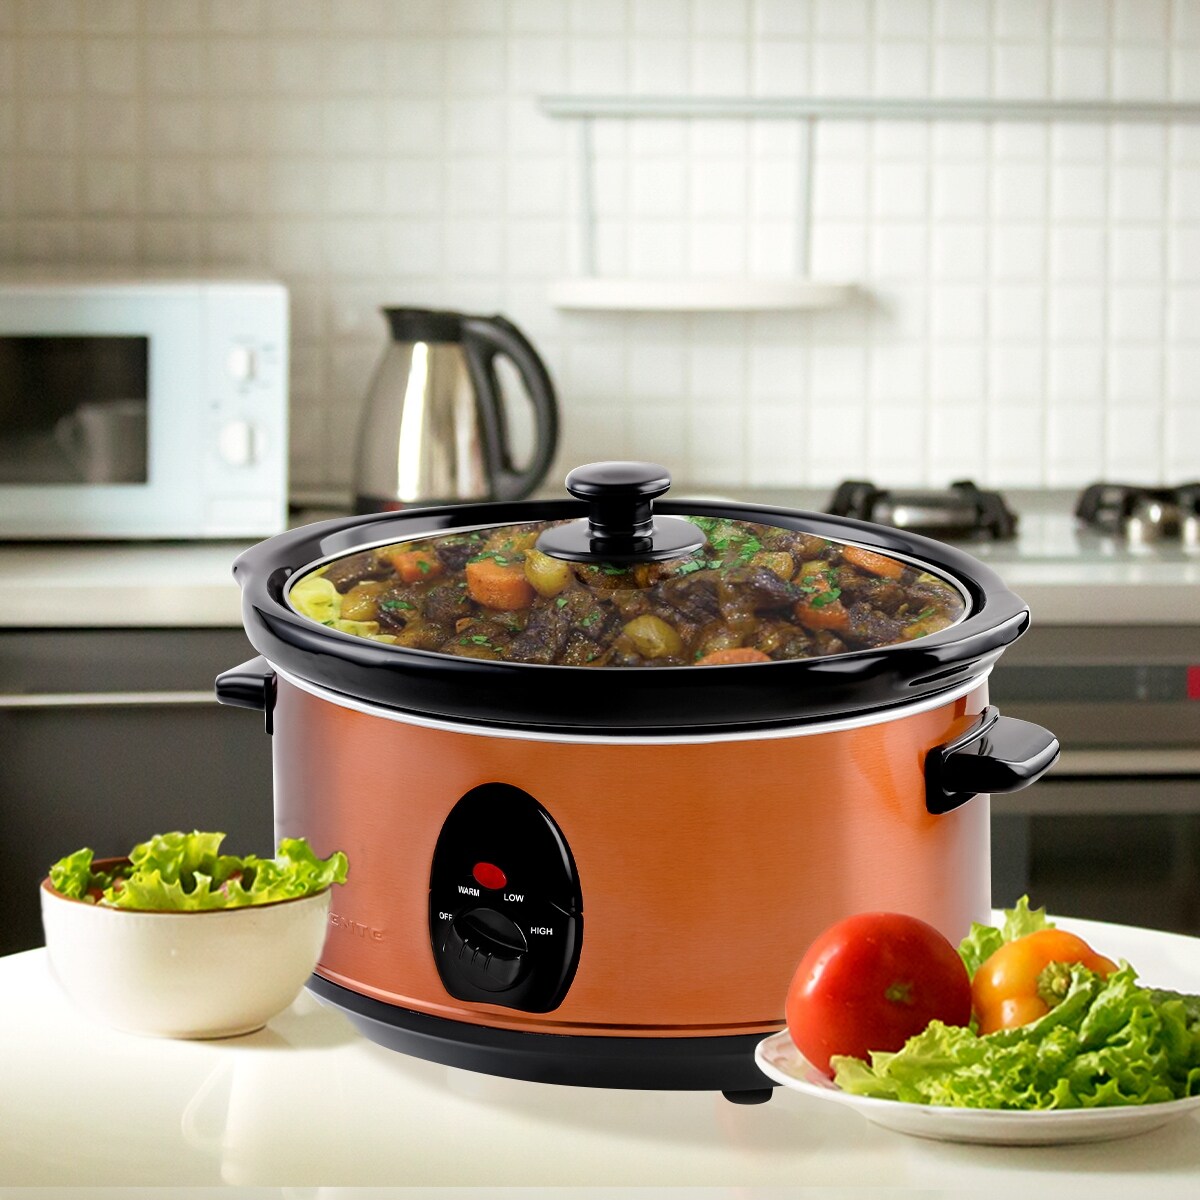 https://ak1.ostkcdn.com/images/products/is/images/direct/3e87851d8d1f75bffa4083e3d4dabbb83ae12e9d/Ovente-Slow-Cooker-Crockpot-3.5-Liter-with-Removable-Ceramic-Pot-3-Cooking-Setting-and-Heat-Tempered-Glass-Lid%2C-SLO35-Series.jpg